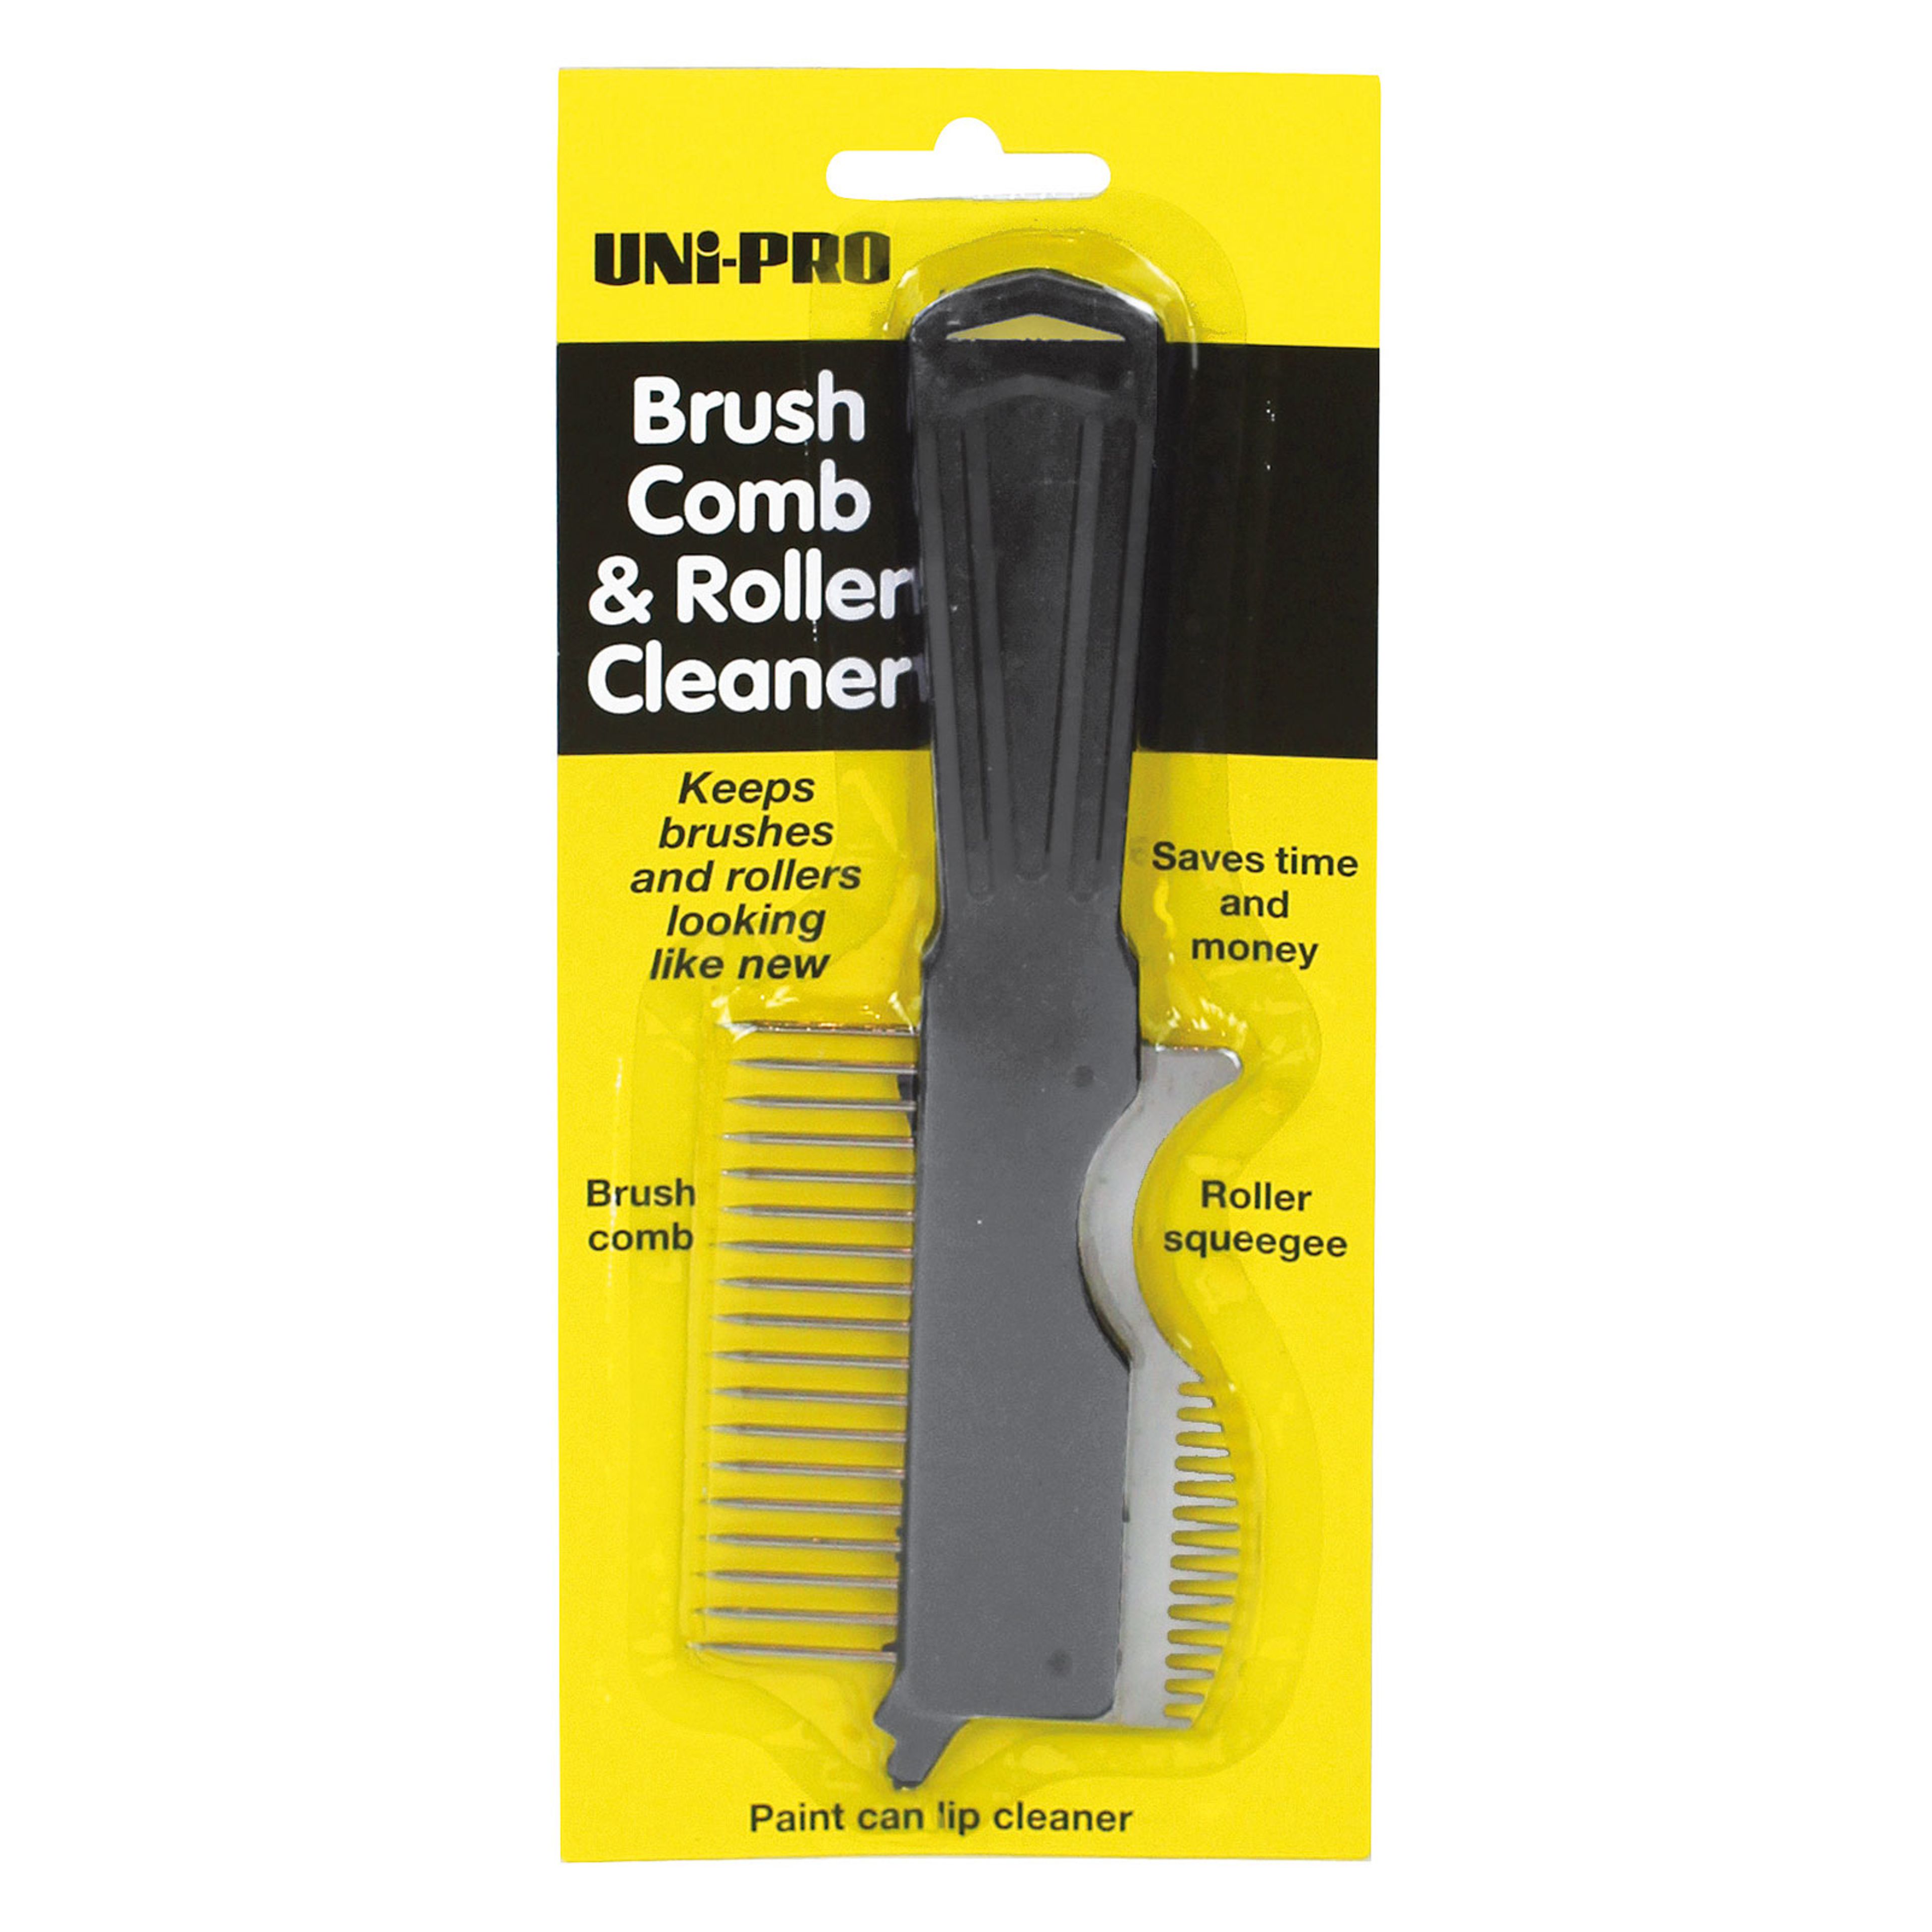 Paint Brush & Roller Cleaners